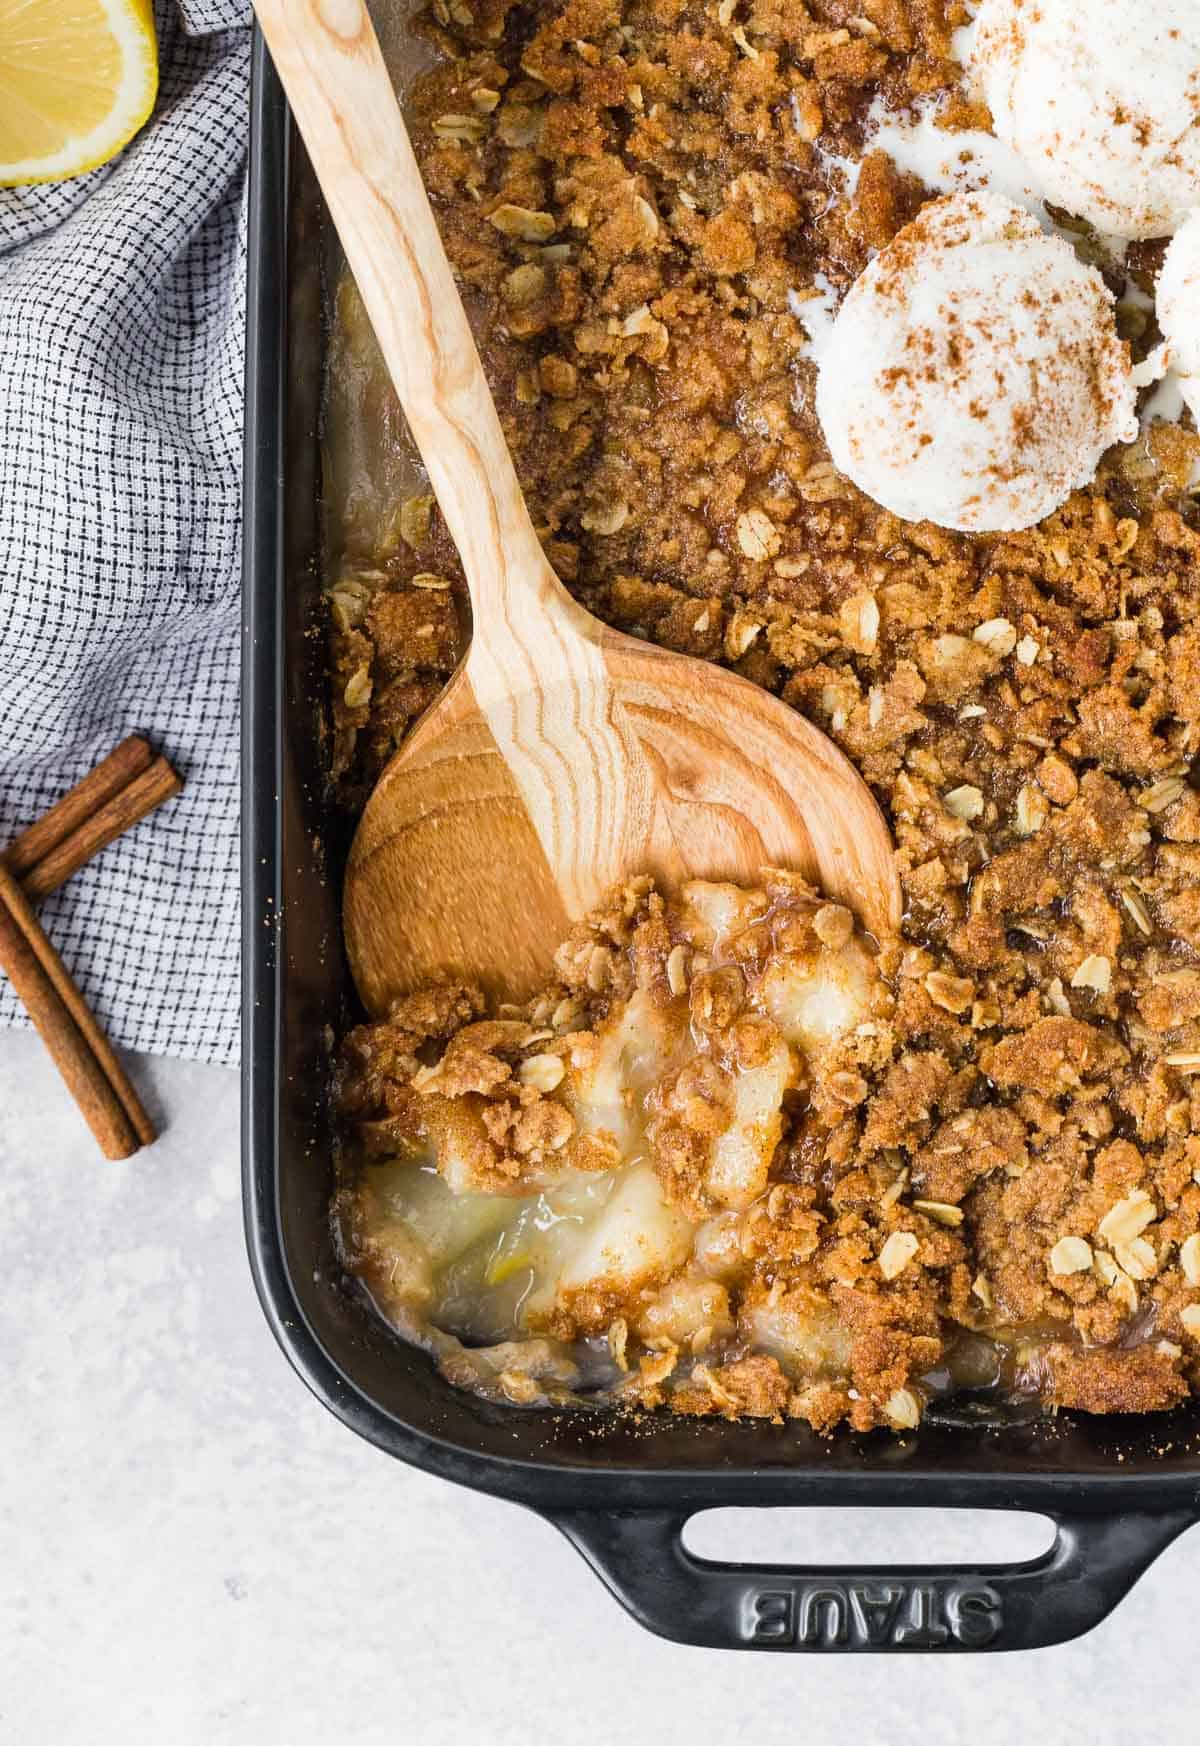 Peach crisp with ginger in a black baking dish, being scooped out with a wooden spoon.